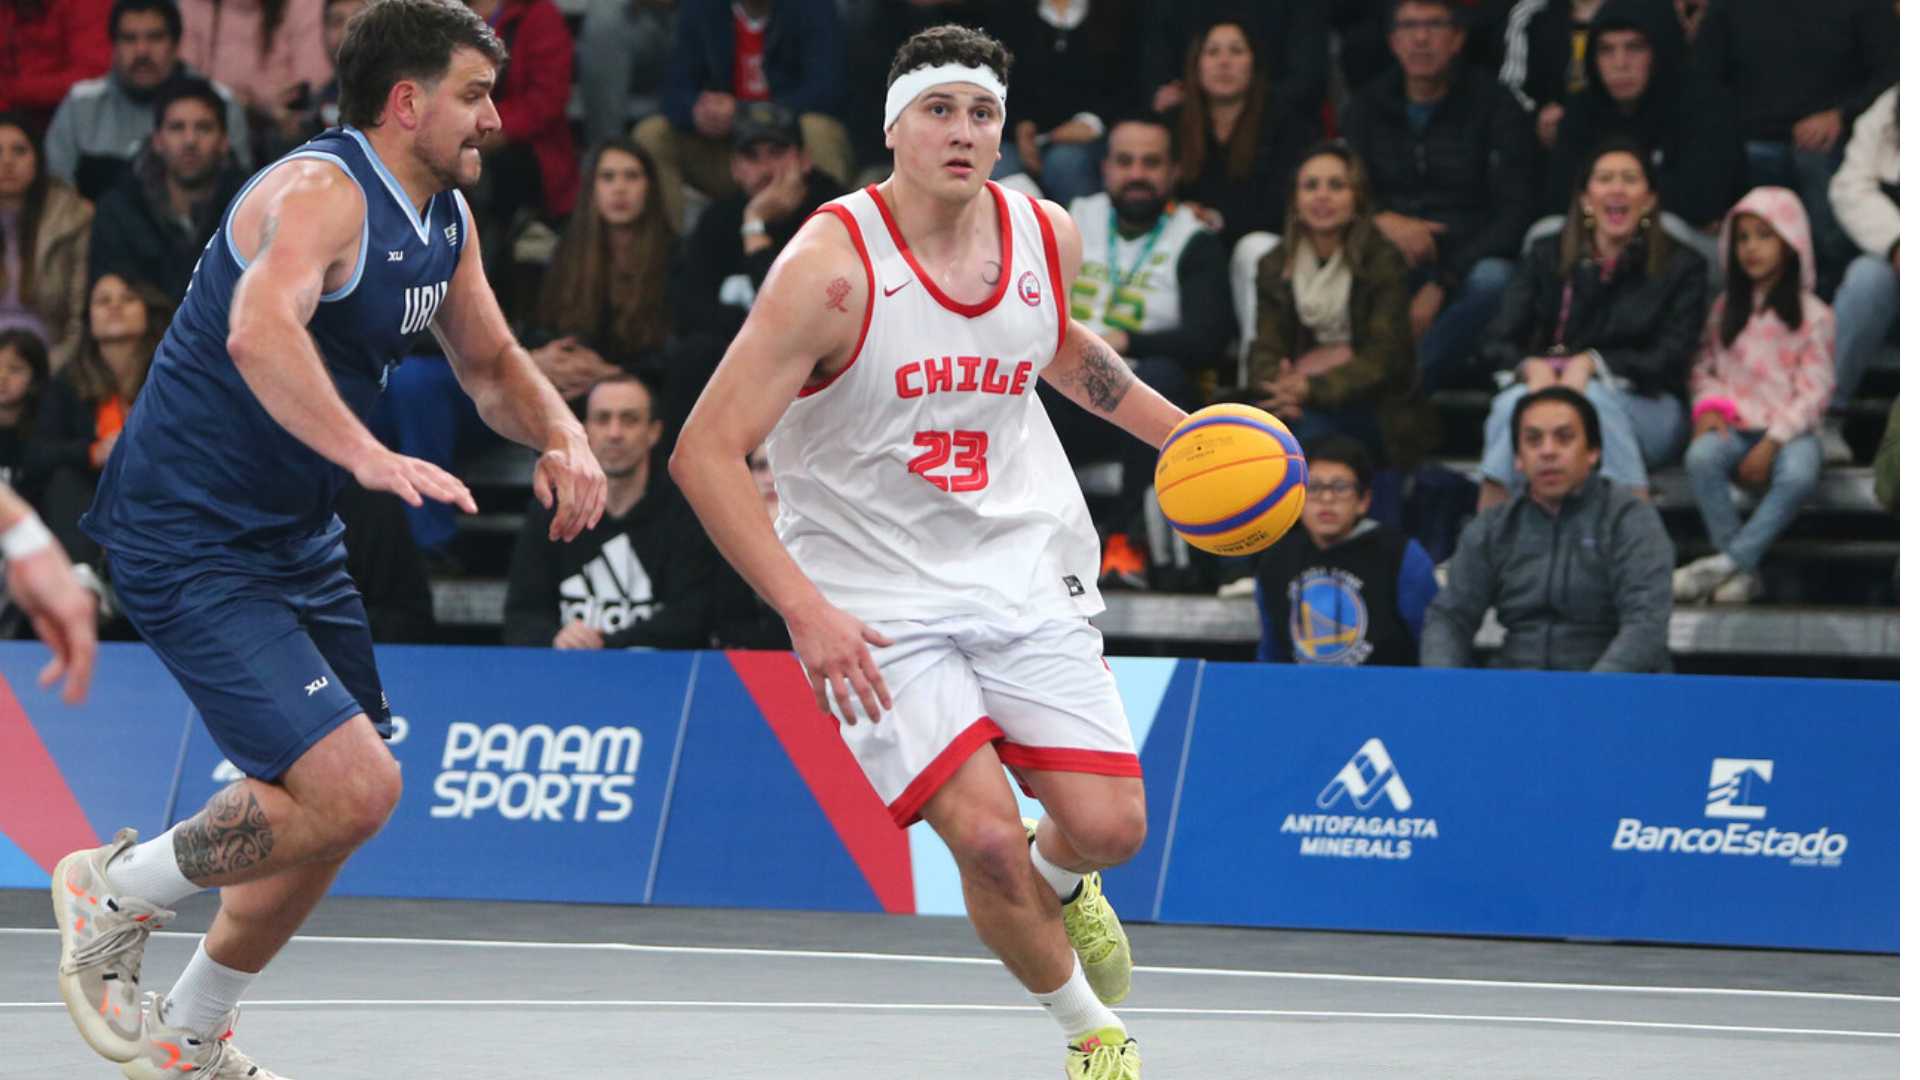 The leading figures in 3x3 Basketball shining in Santiago